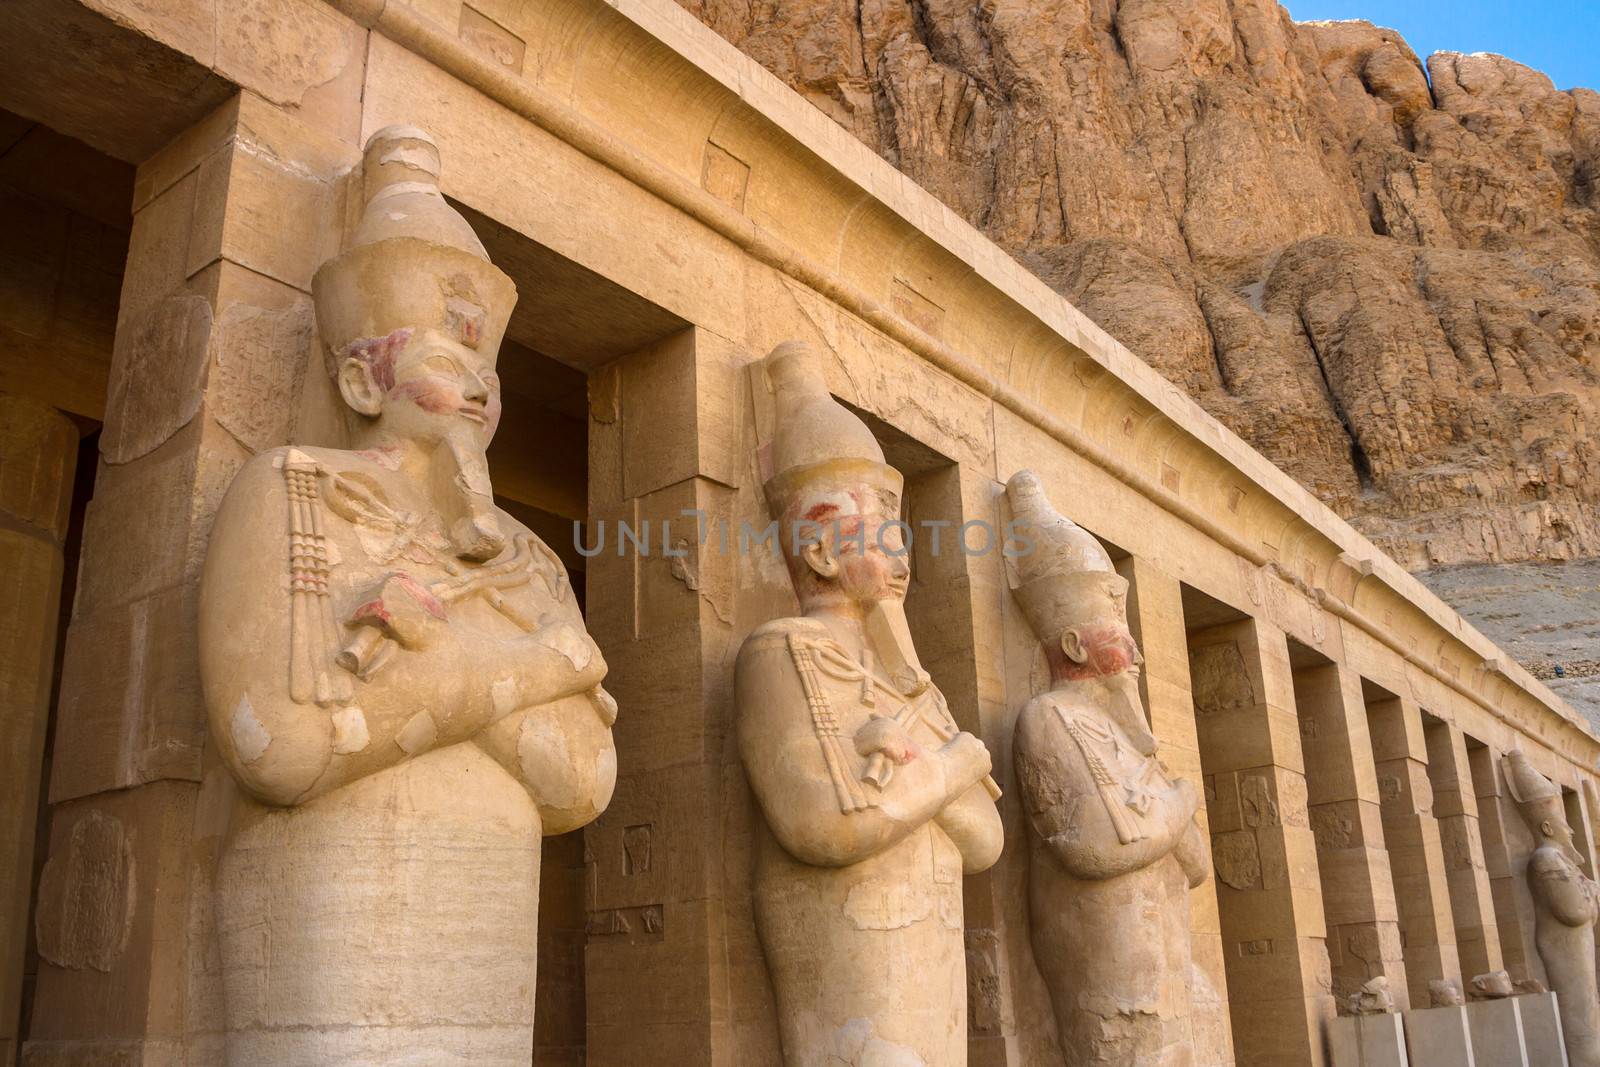 Statues of Queen Hatshepsut in Luxor (Thebes), Egypt.  by kasto